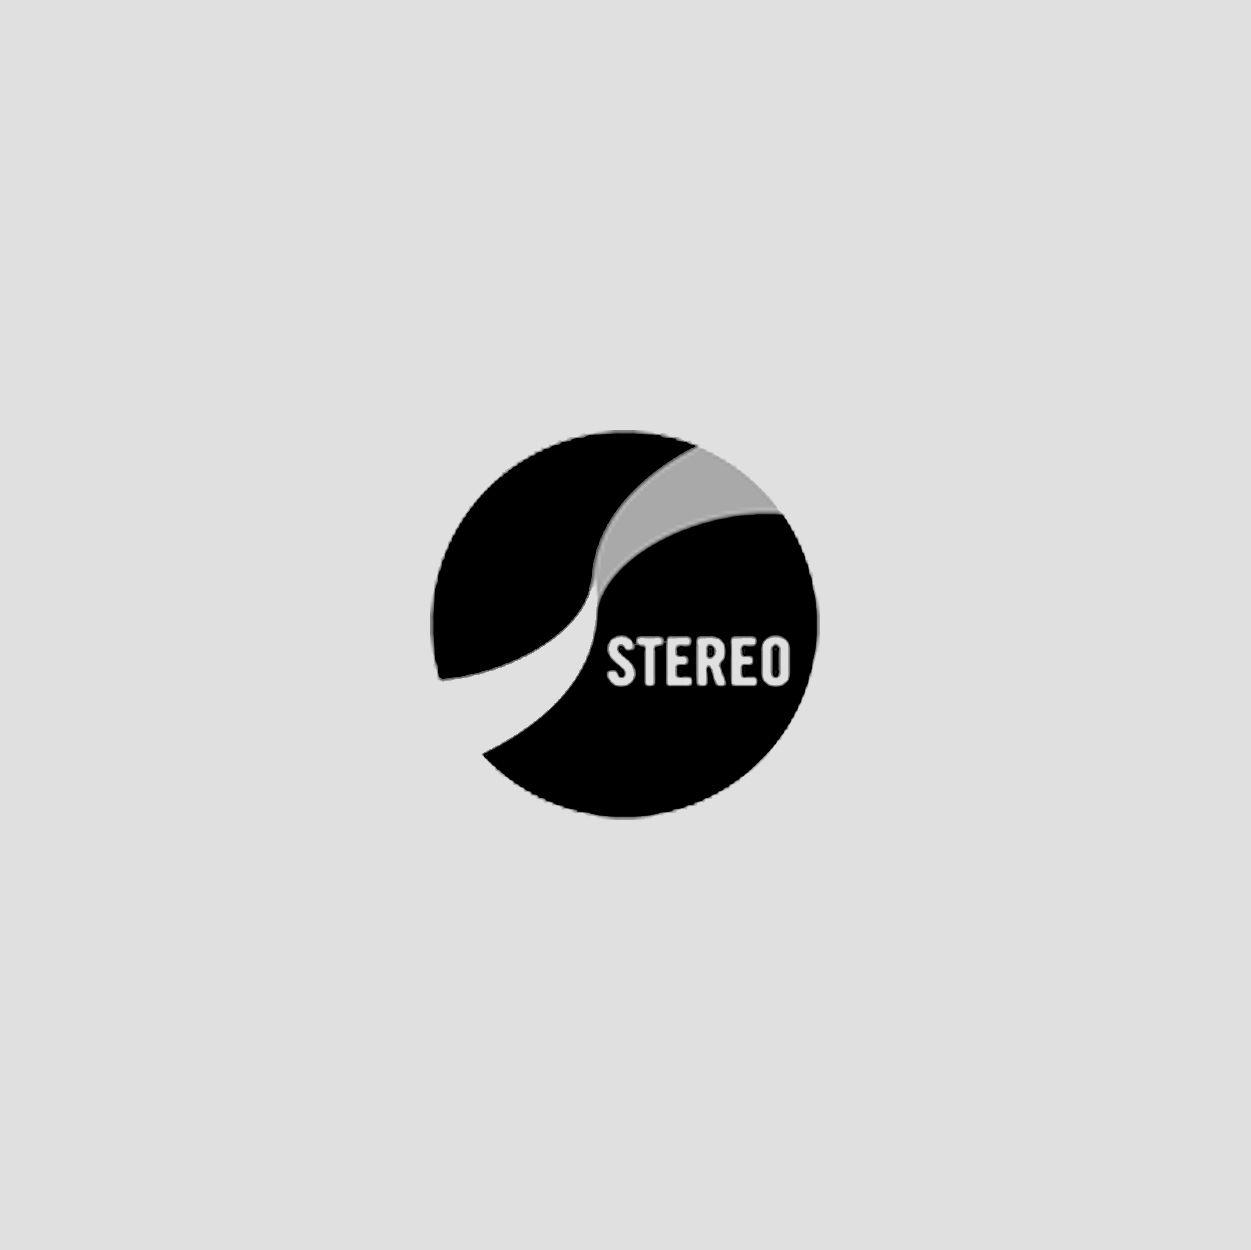 Stereo Logo - Stereo, naturally luxurious wallpapers - London Wallpaper Company